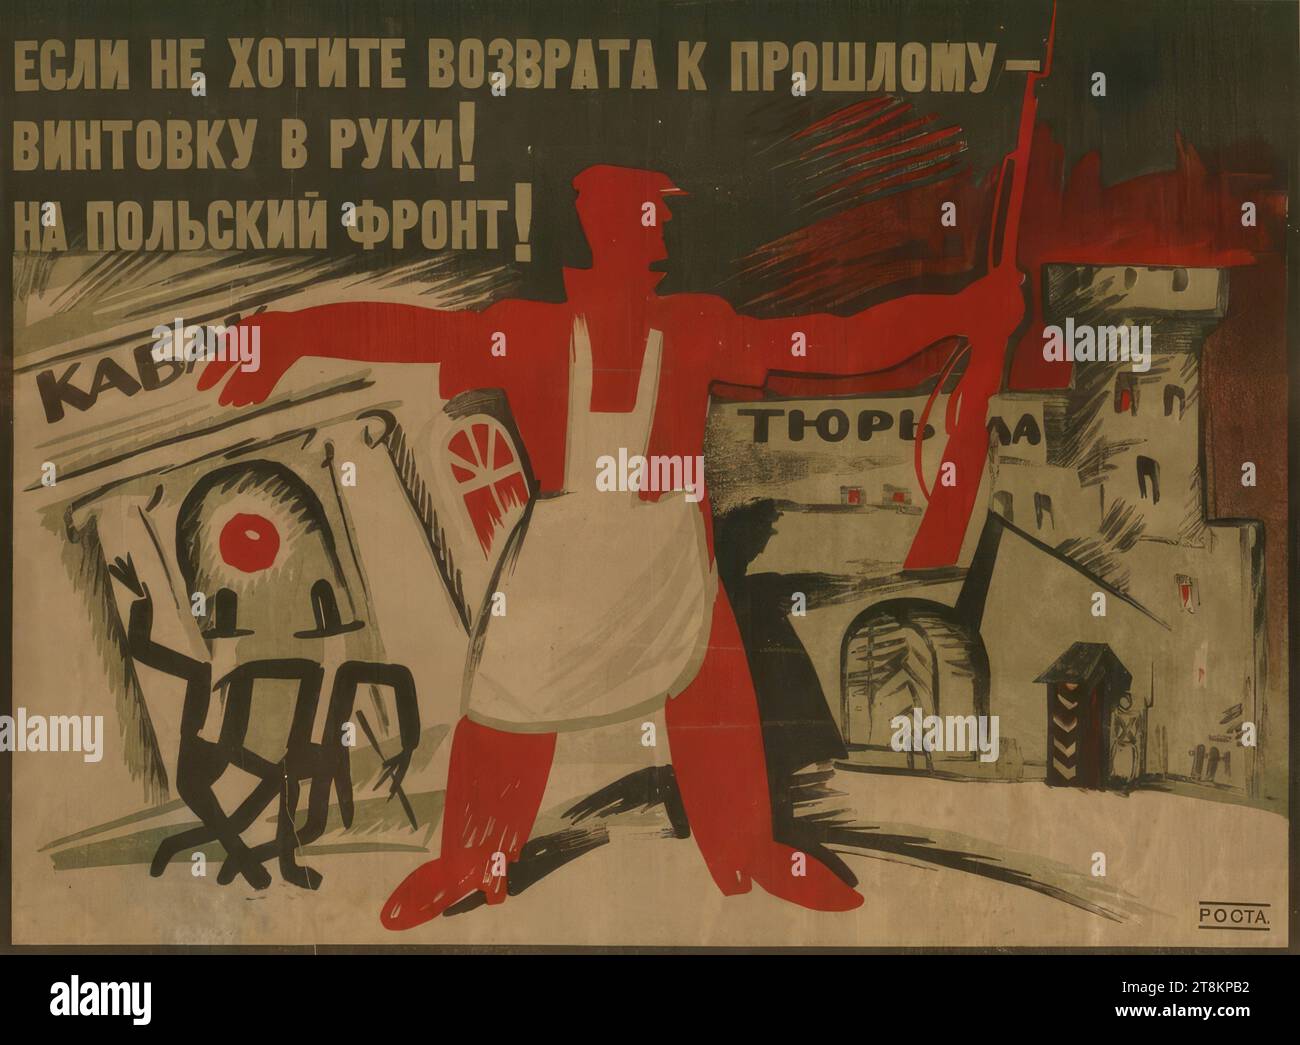 Do you want to go back to the past? Grab your gun! To the Polish front!, Vladimir W. Mayakovsky, Georgia, 1893 - 1930, Ivan Andreyevich Malyutin, Russia, 1890 - 1932, 1920, print, color lithograph, sheet: 510 mm x 700 mm, right. Rubber stamp Stock Photo